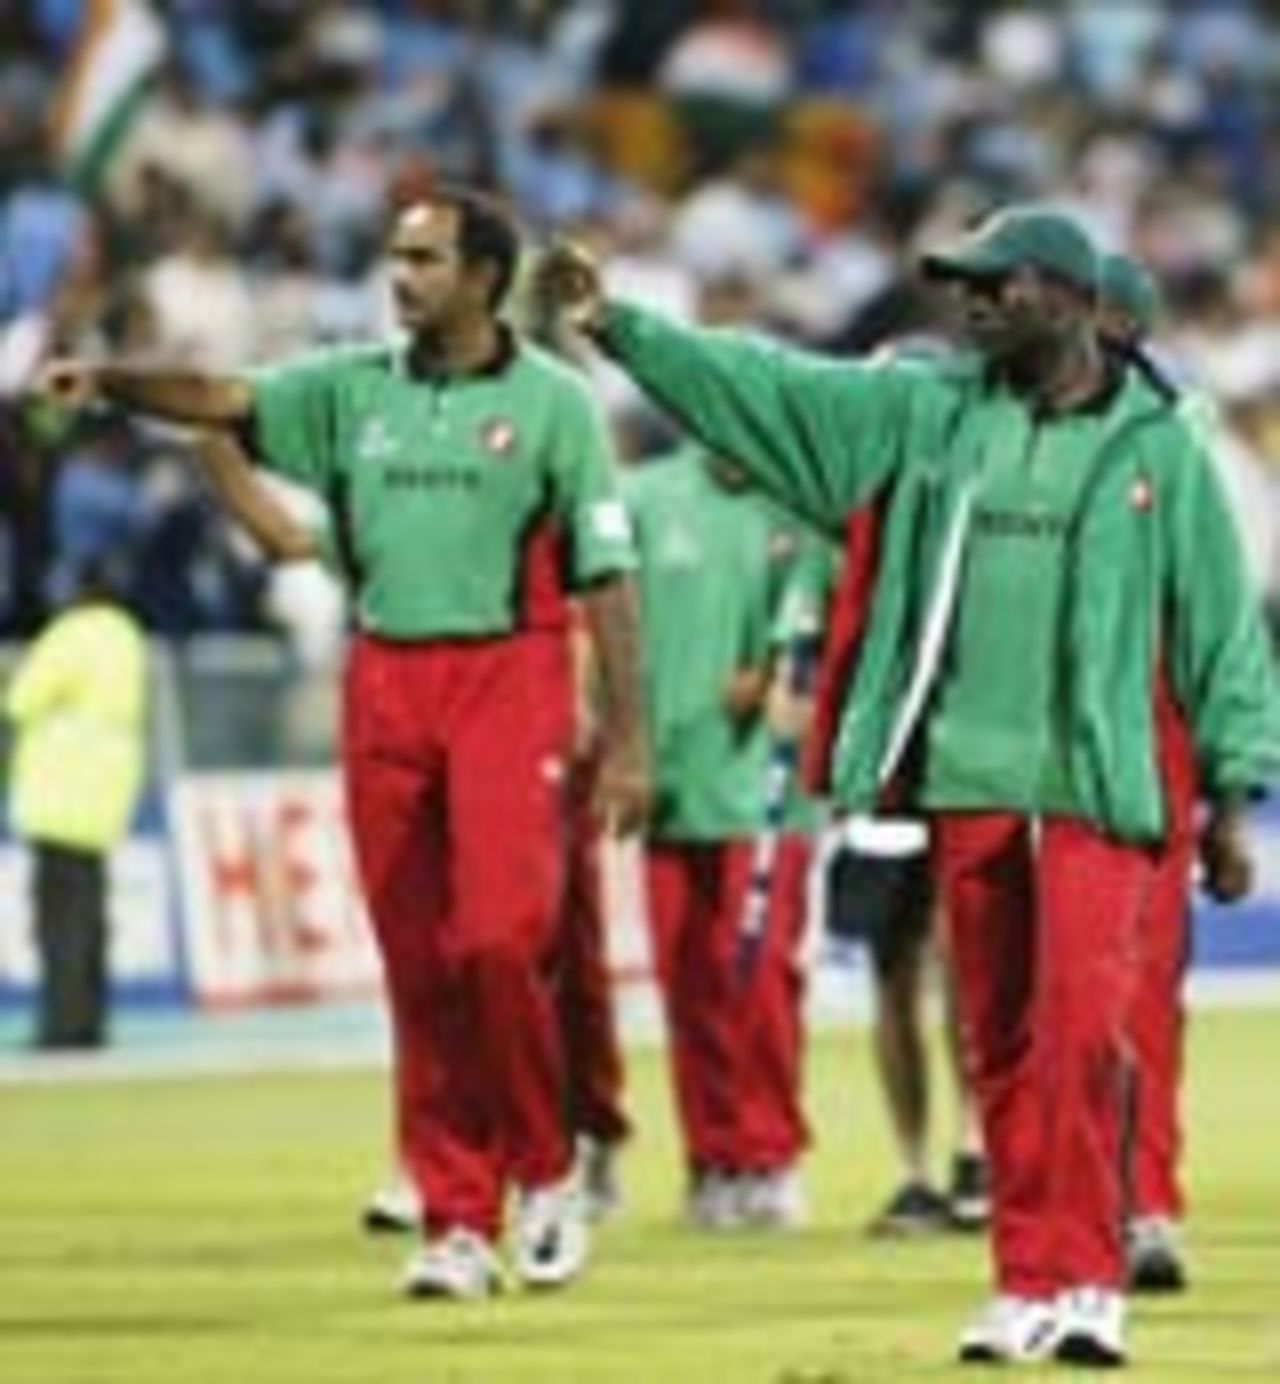 The Kenyan team find a rare opportunity to celebrate